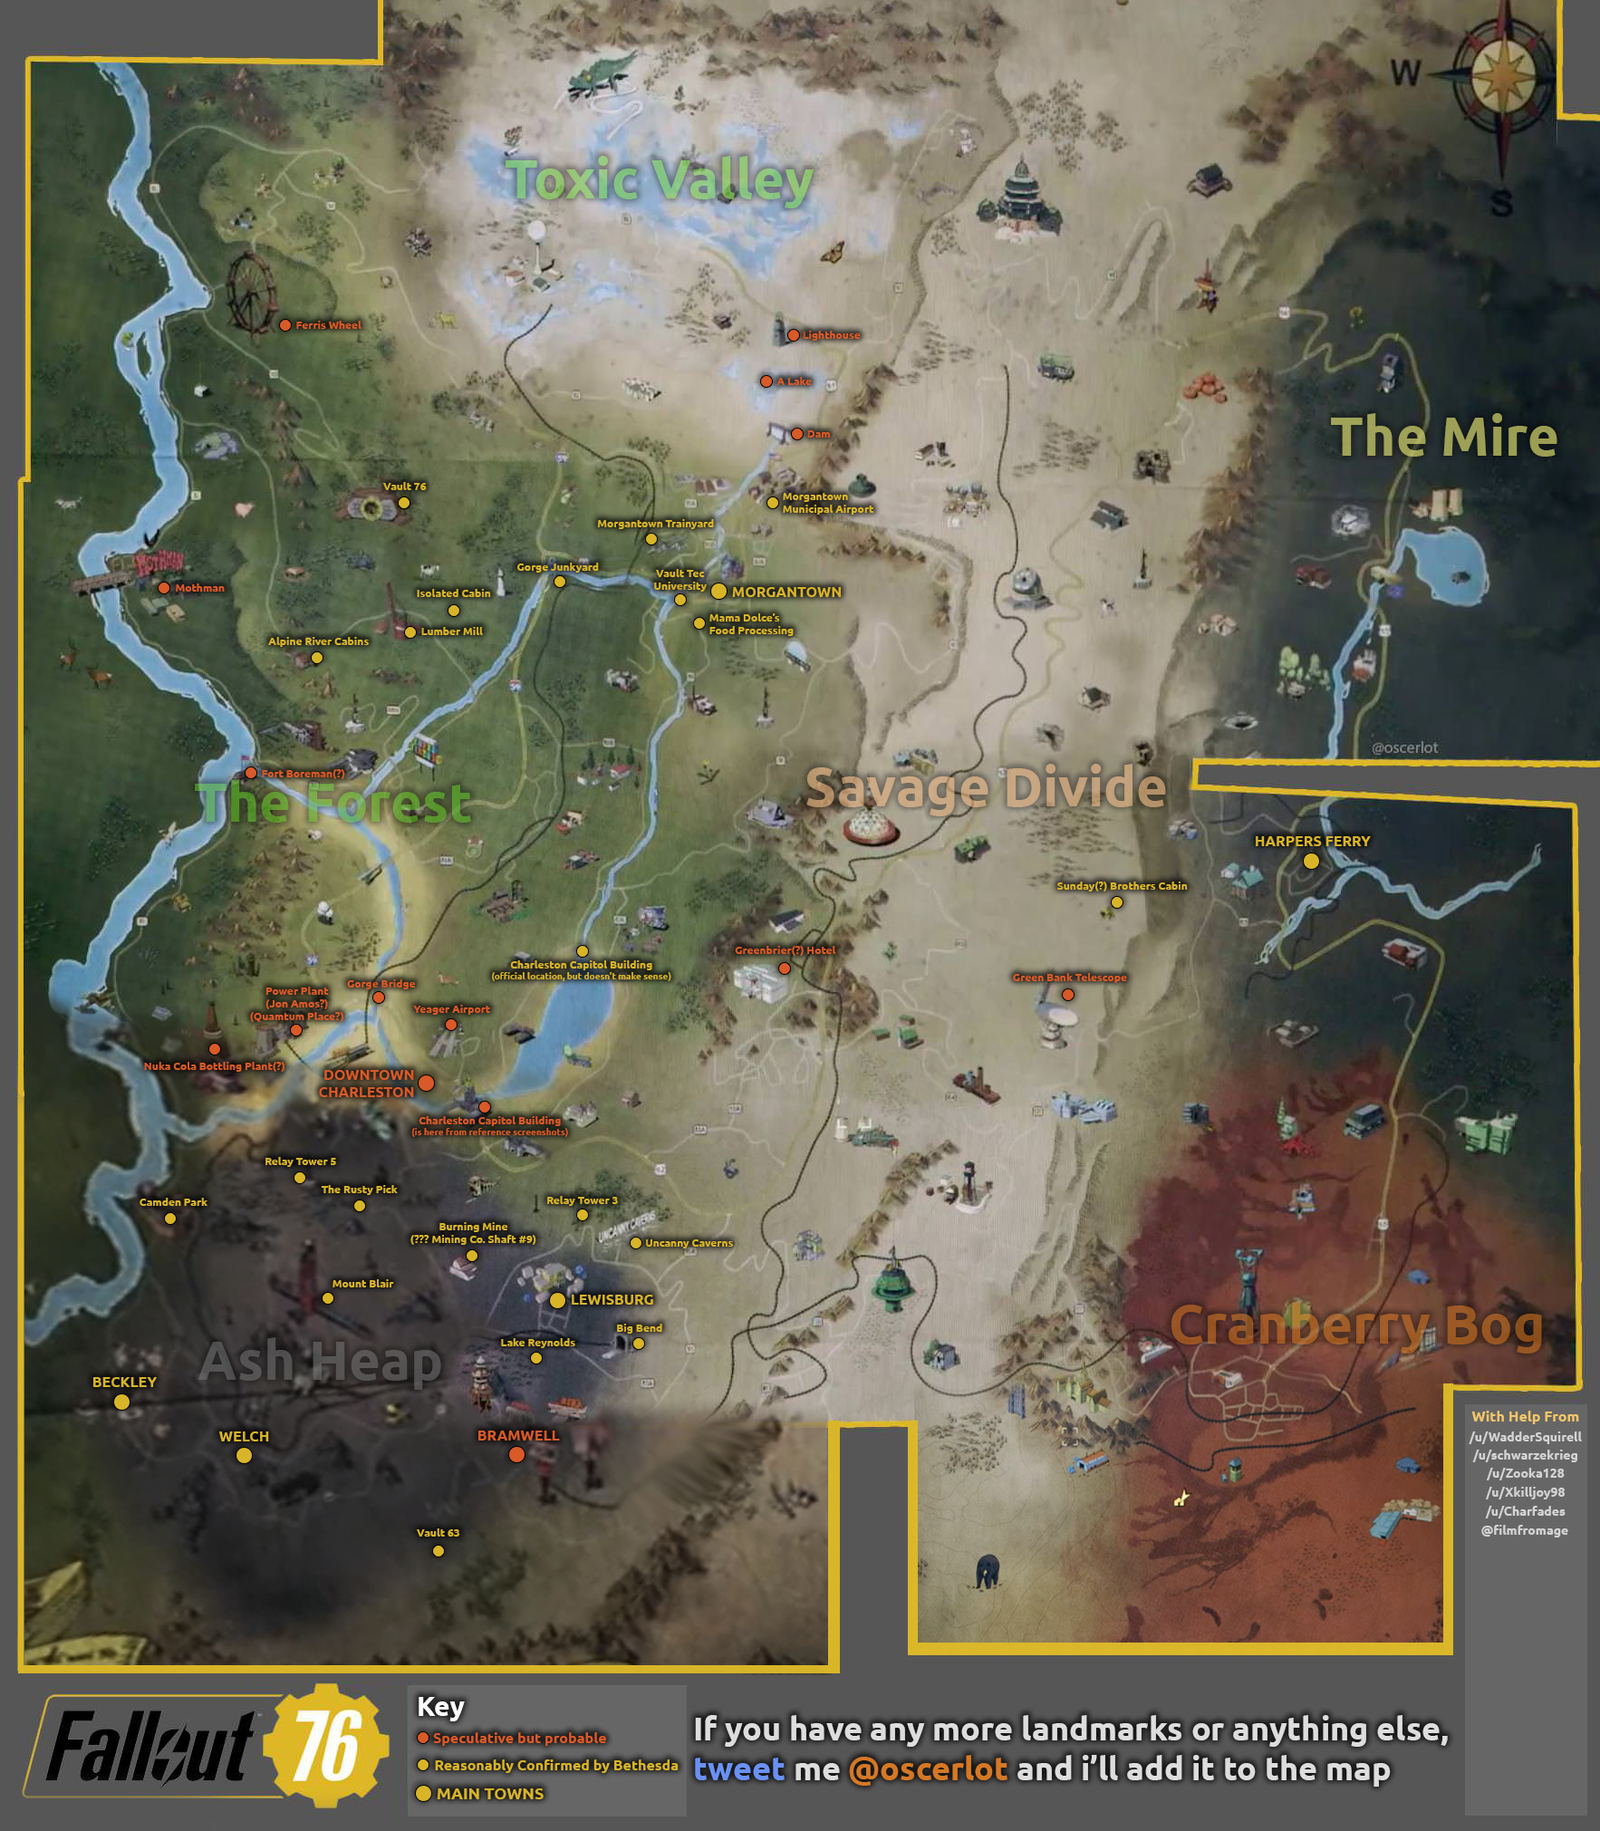 Fallout 76 map variant leaked online - Bethesda, Computer games, Reddit, Analysis, Fallout, Fallout 76